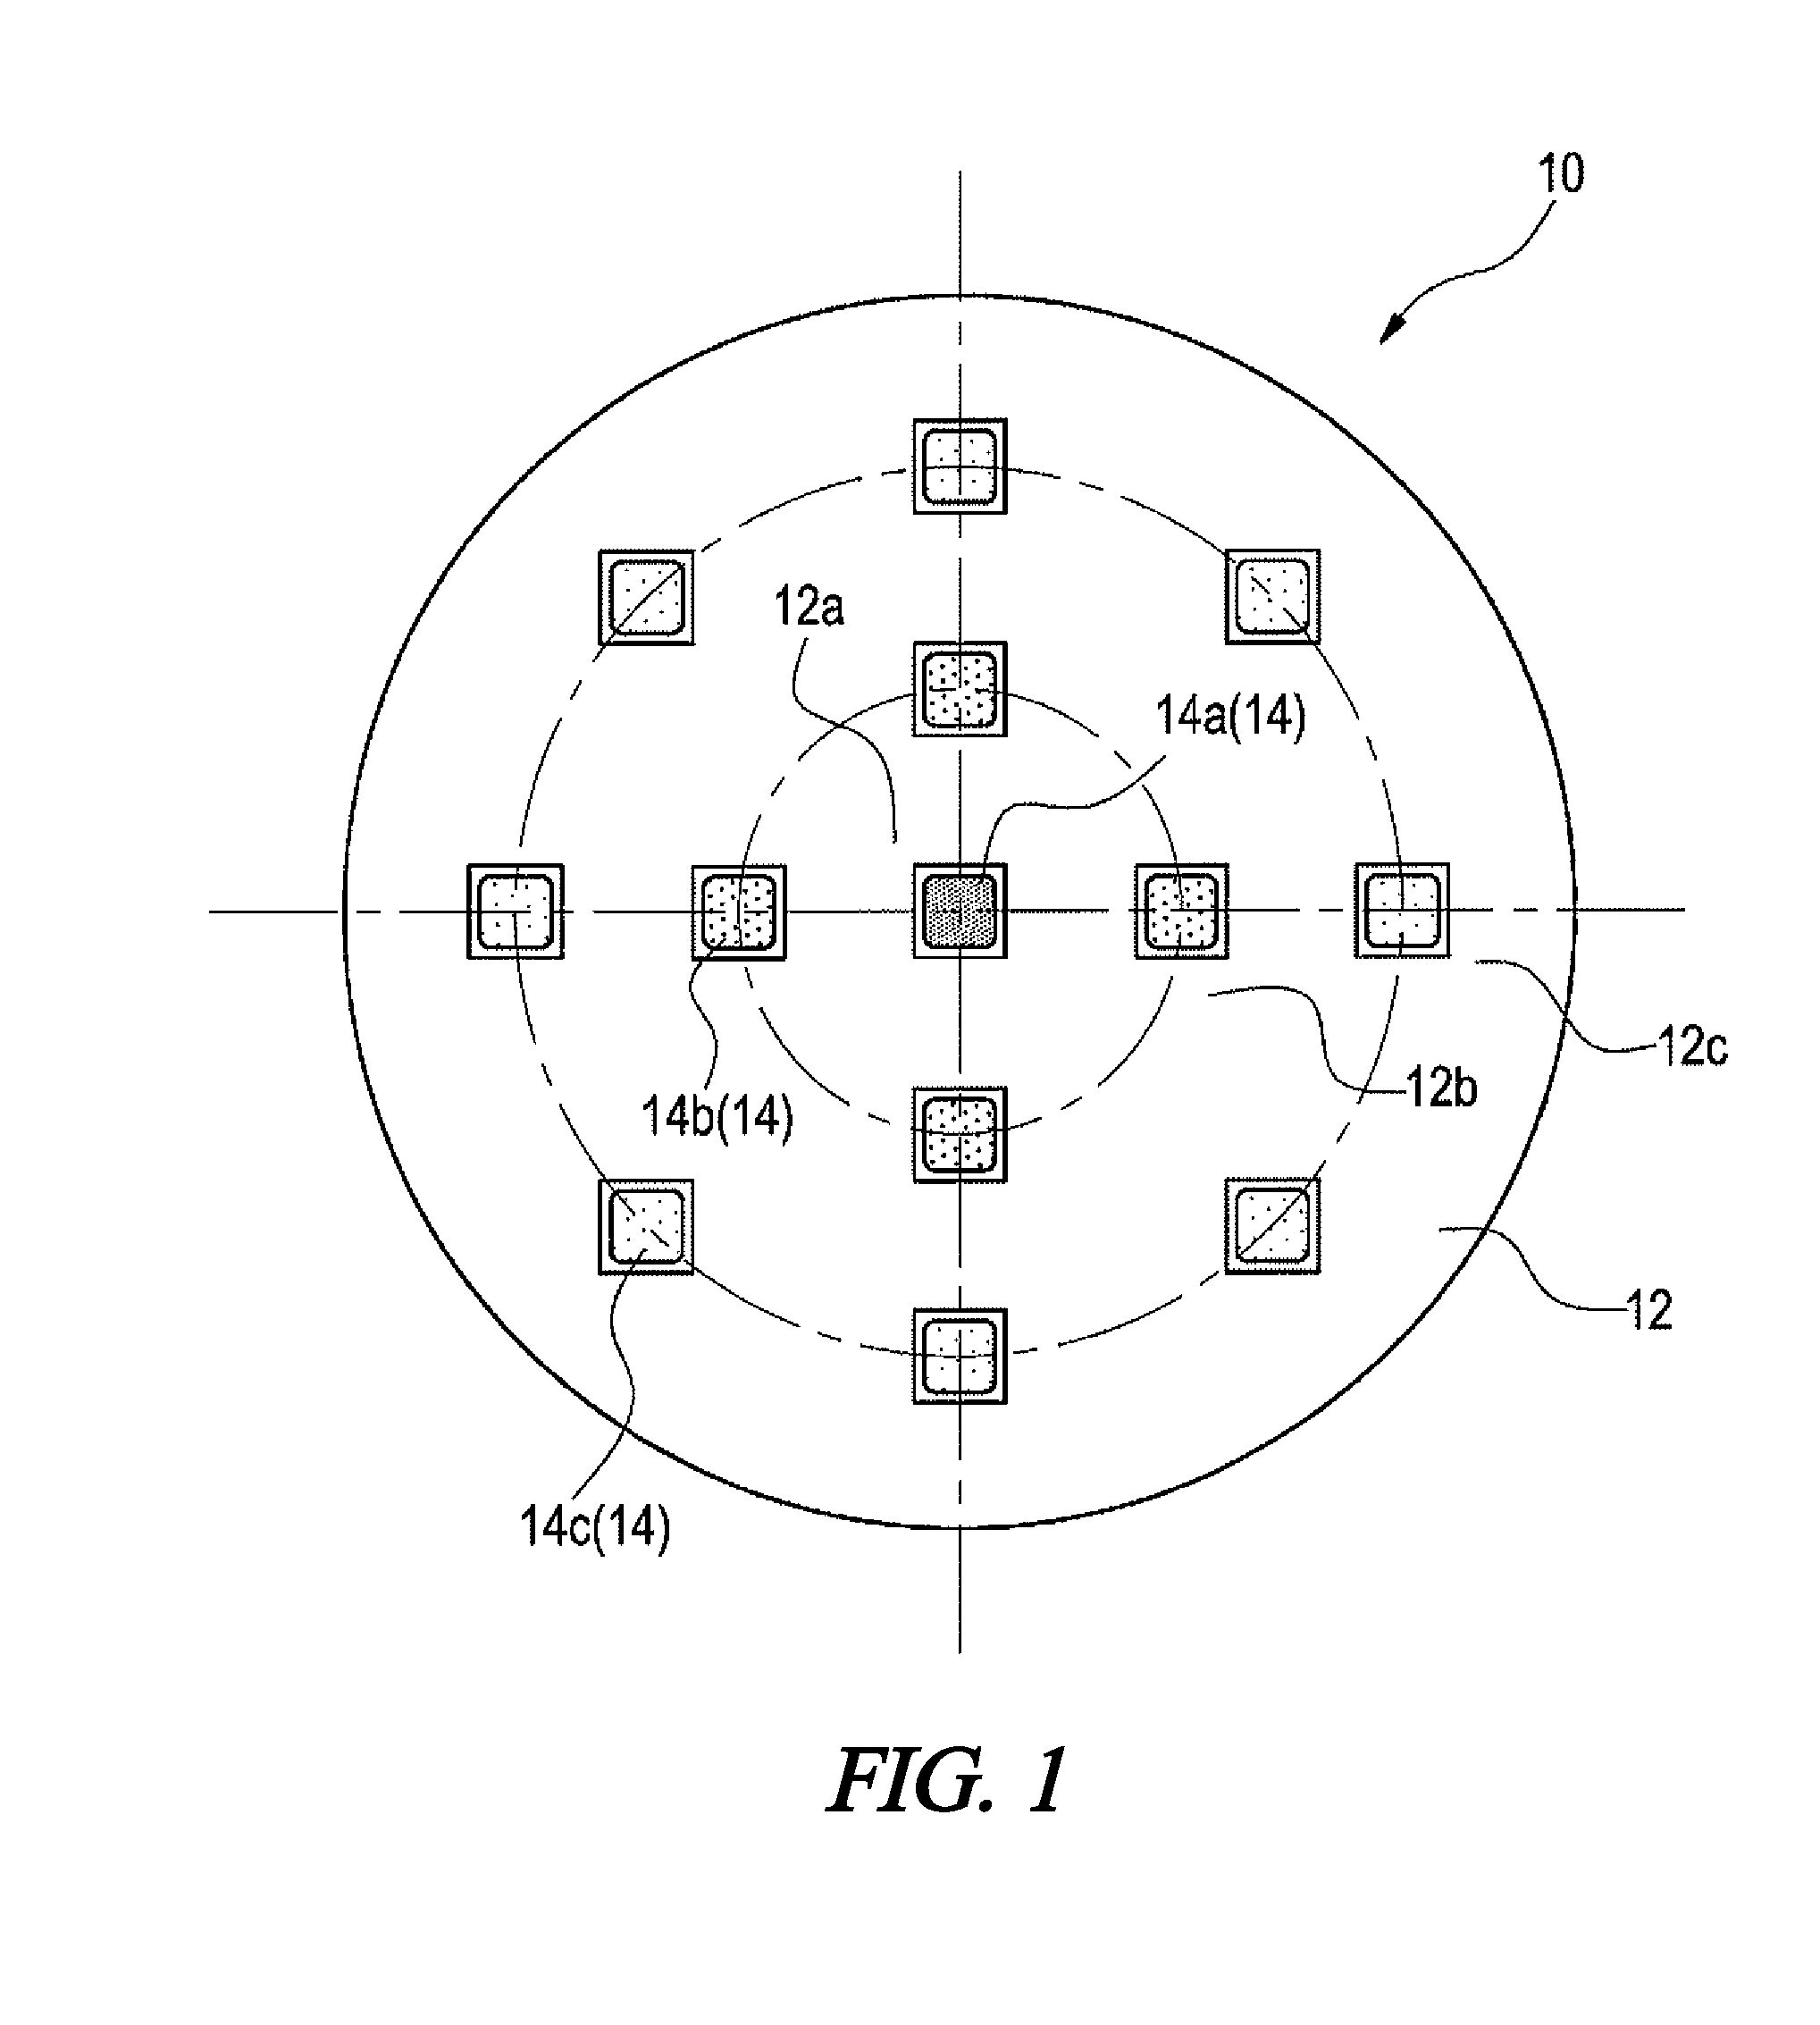 Illumination device having multiple LED elements with varying color temperatures